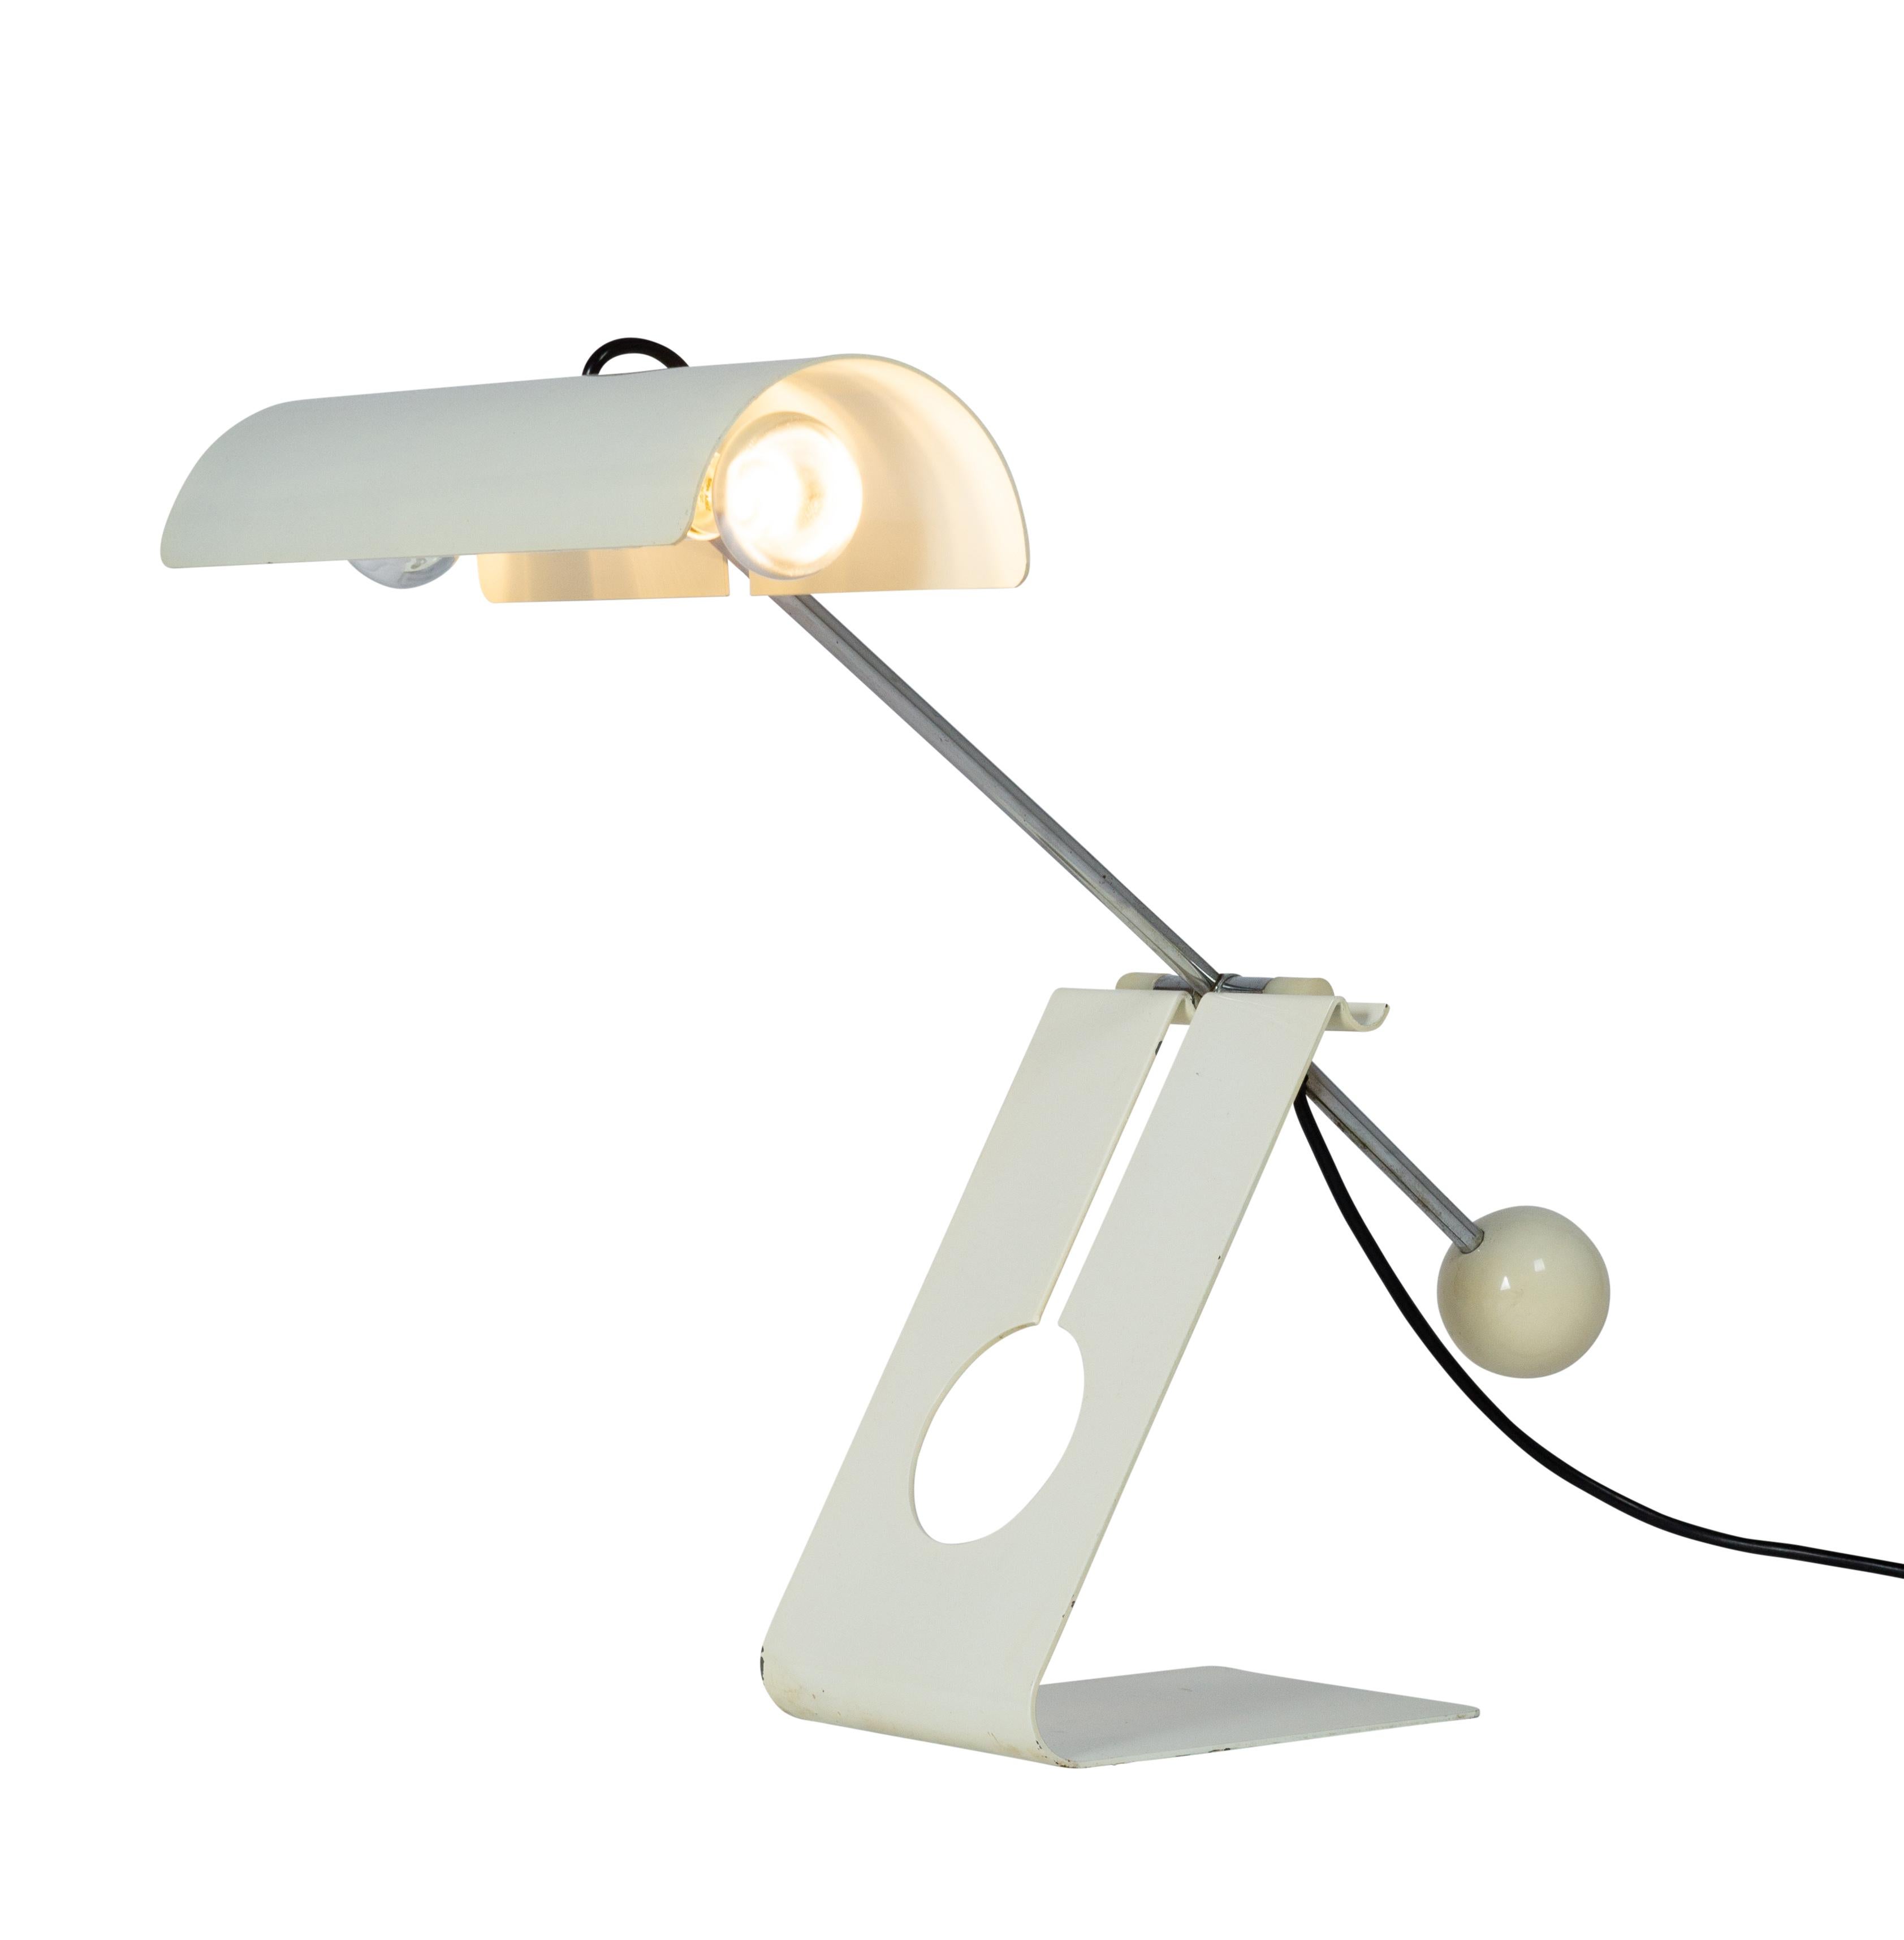 Fratelli Martini by Mauro Martini desk lamp “Picchio” Italy,

design and functionality are completely thought out. the counterbalance weight is adjusted to pass through the upright. the lampshade is also fully adjustable. the options are endless,